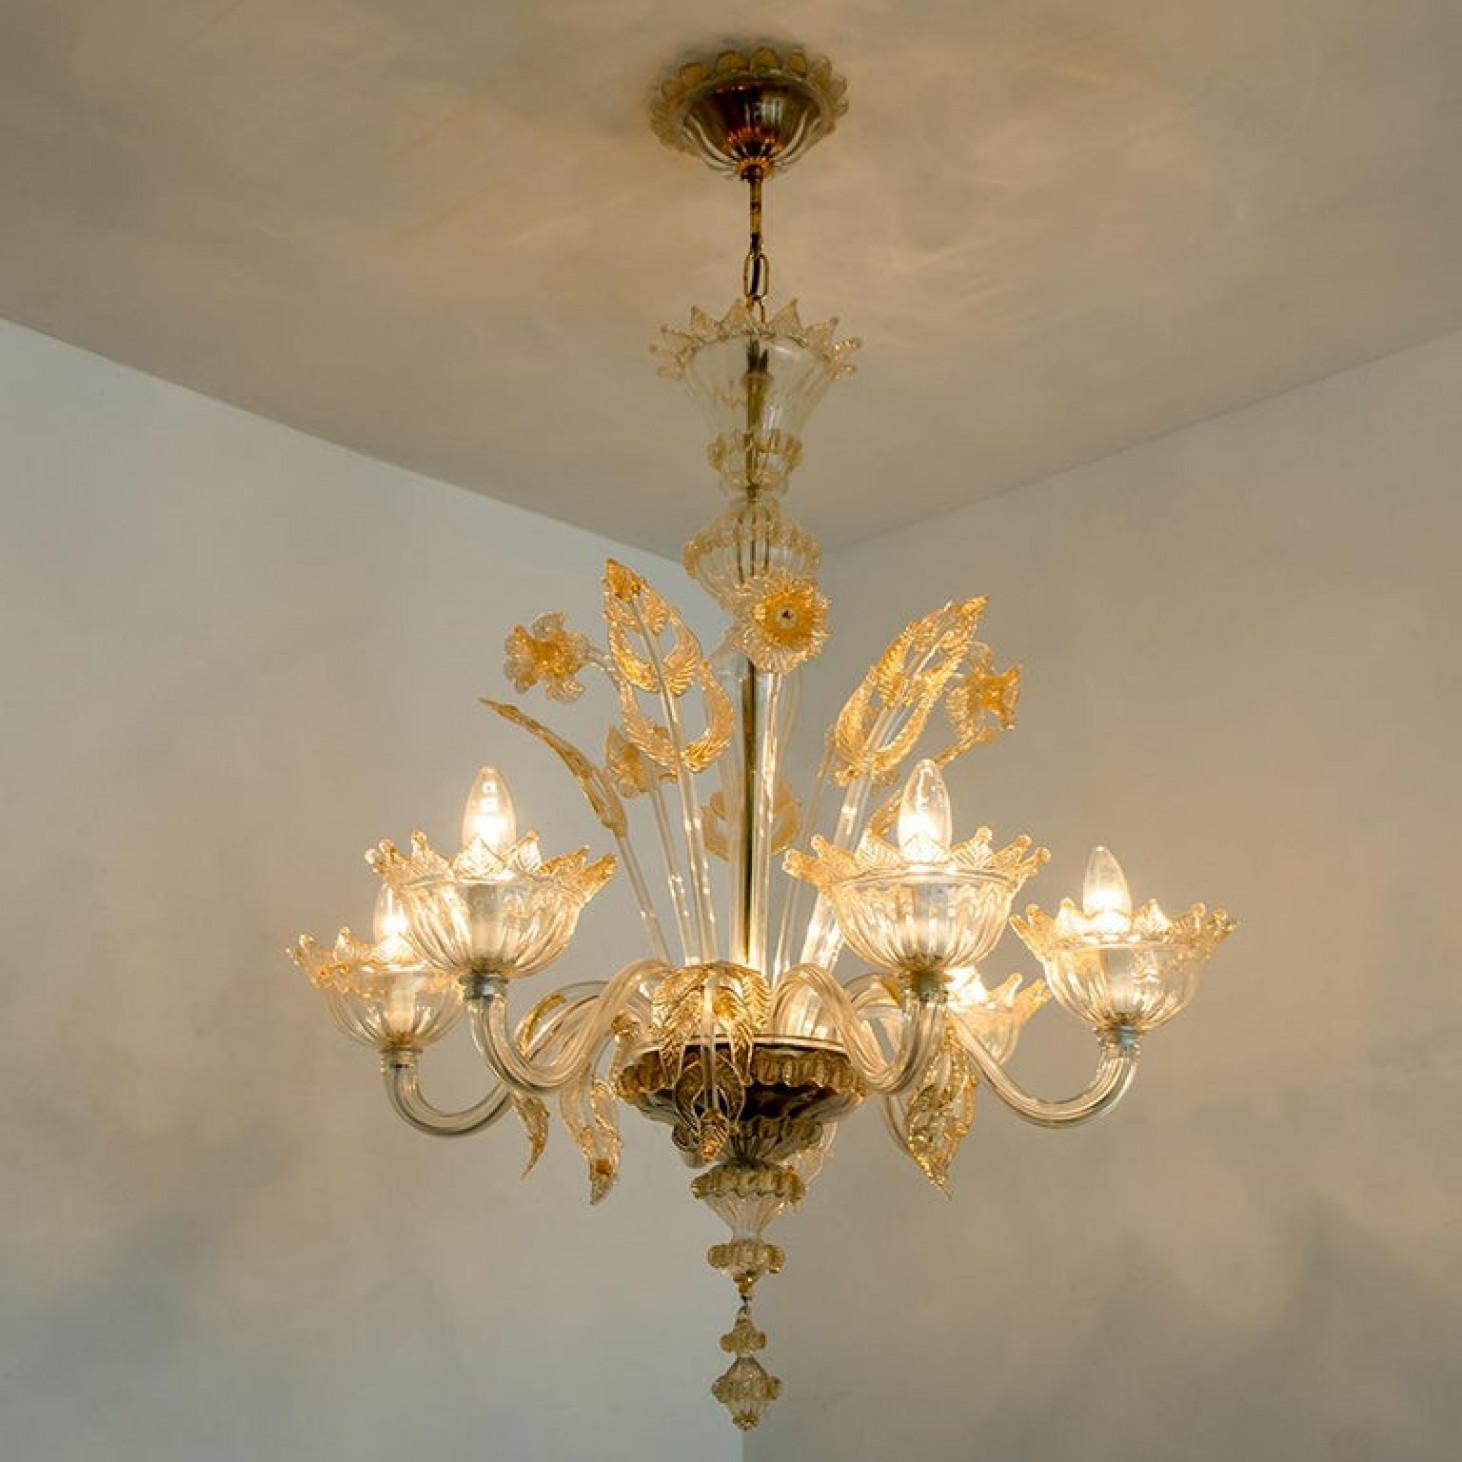 Other Large Venetian Chandelier in Gilded Murano Glass, by Barovier, 1950s For Sale